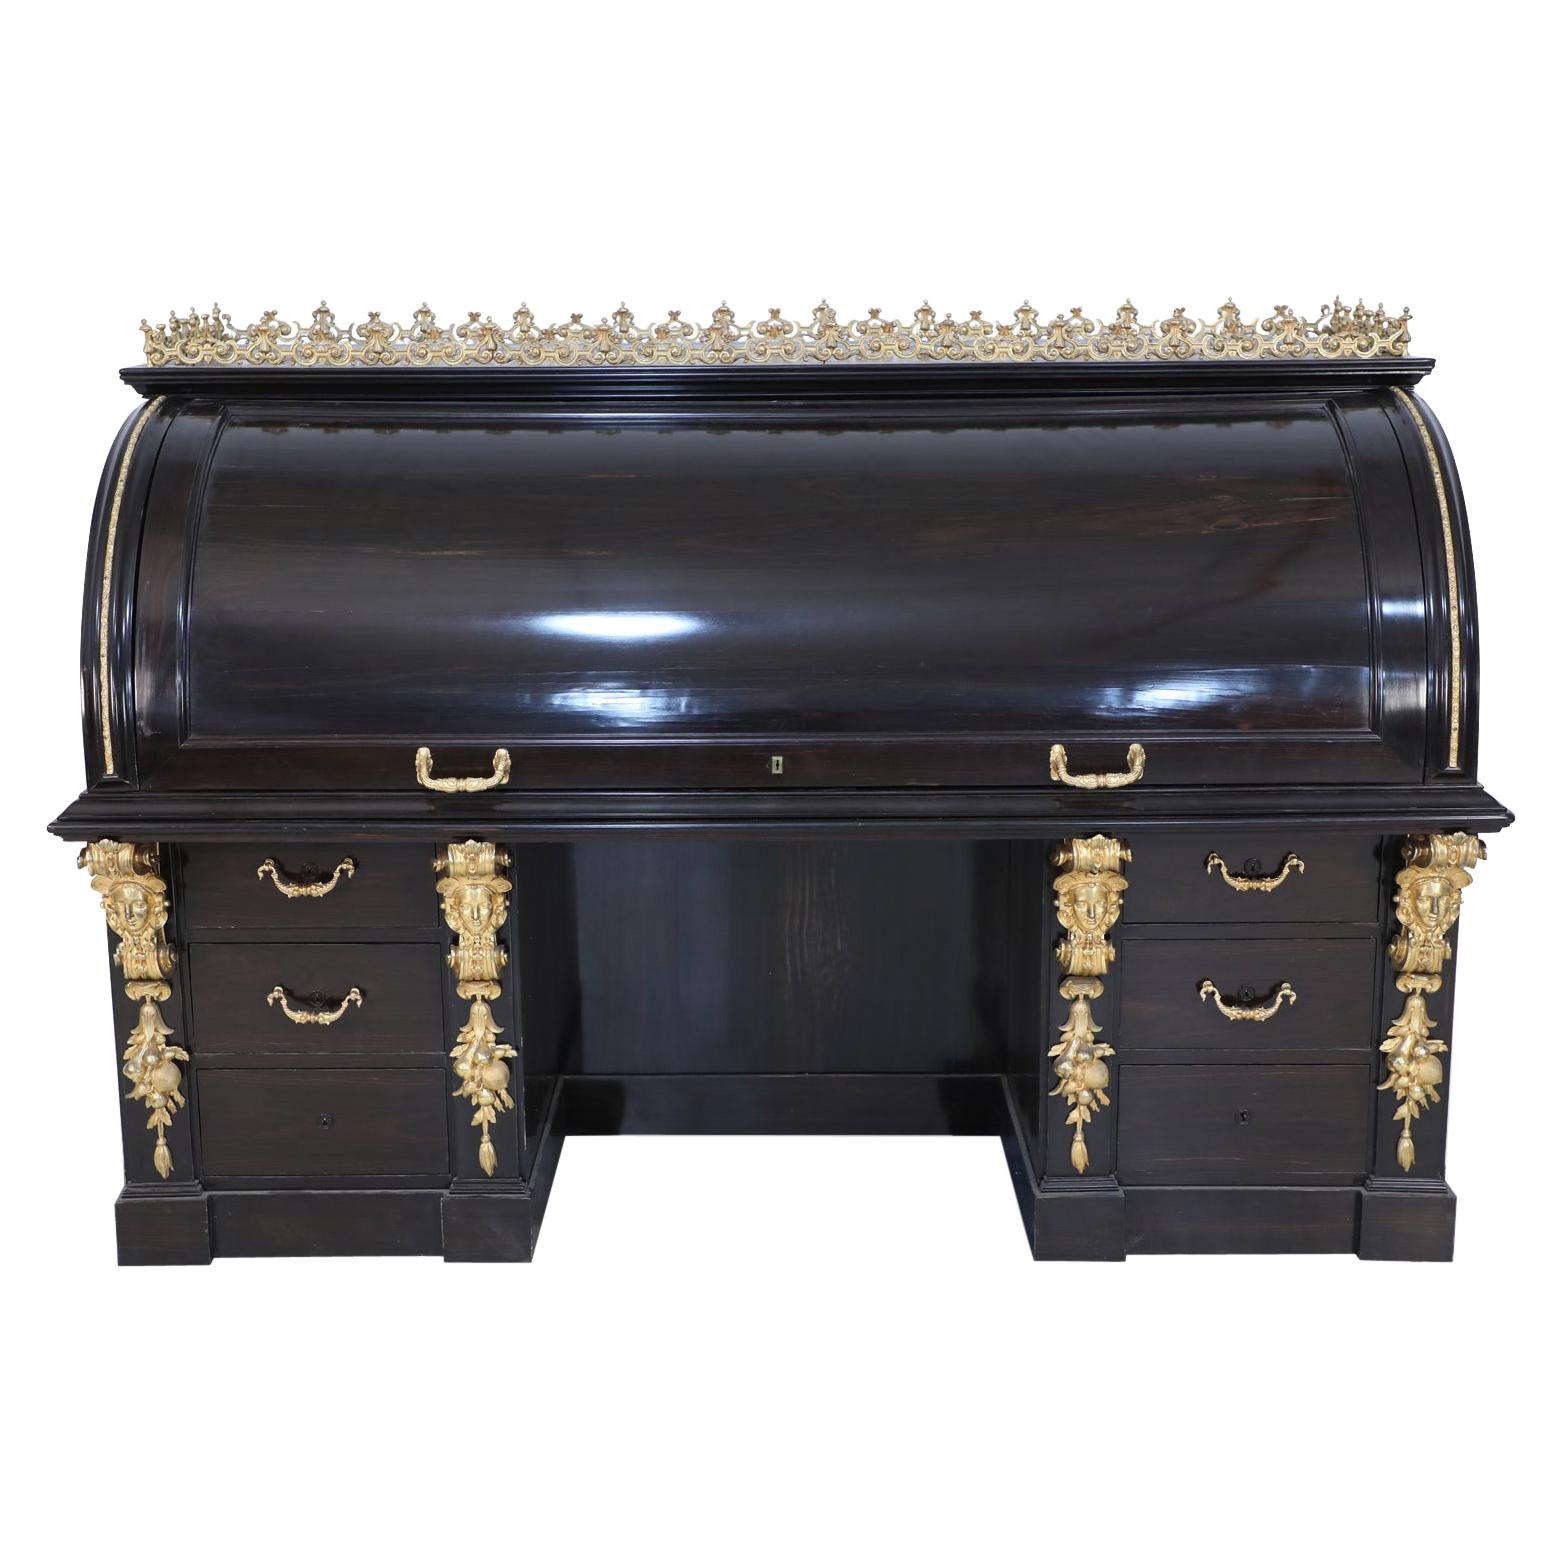 19th Century Empire Style English Roll Top Desk with Bronze Mounts